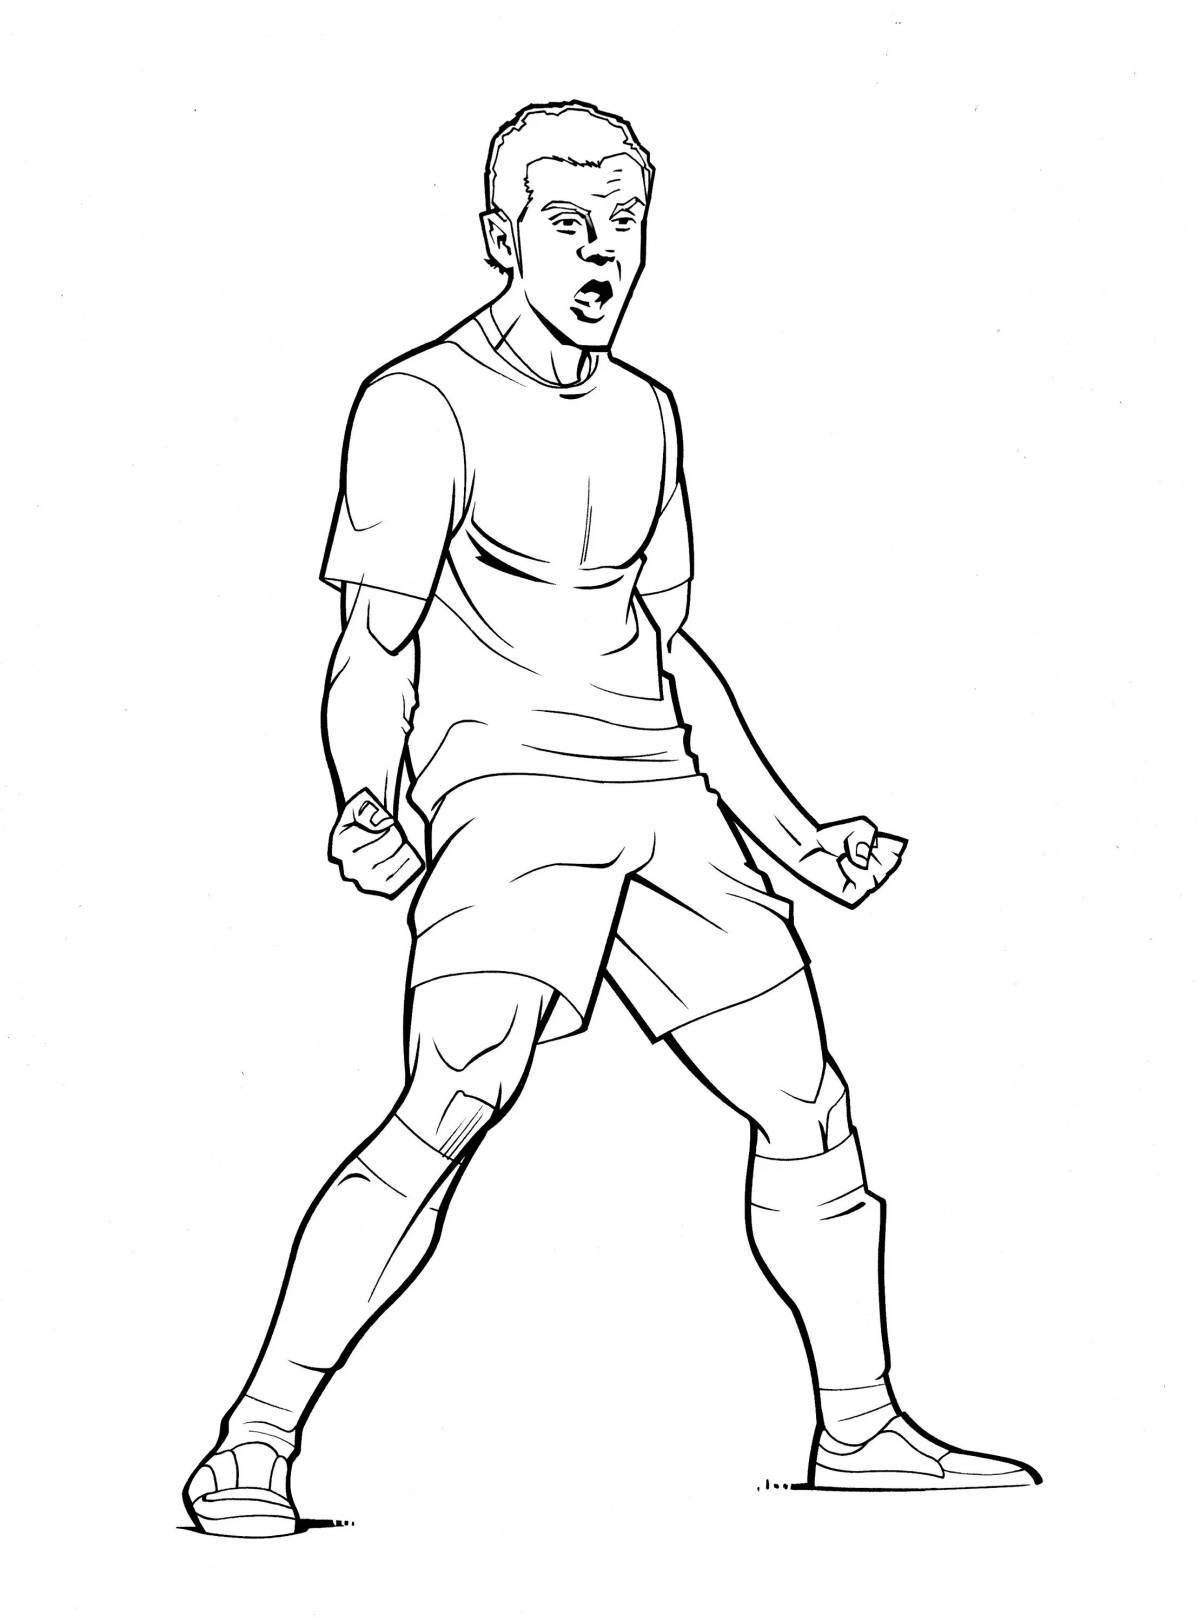 Coloring page with spectacular soccer player